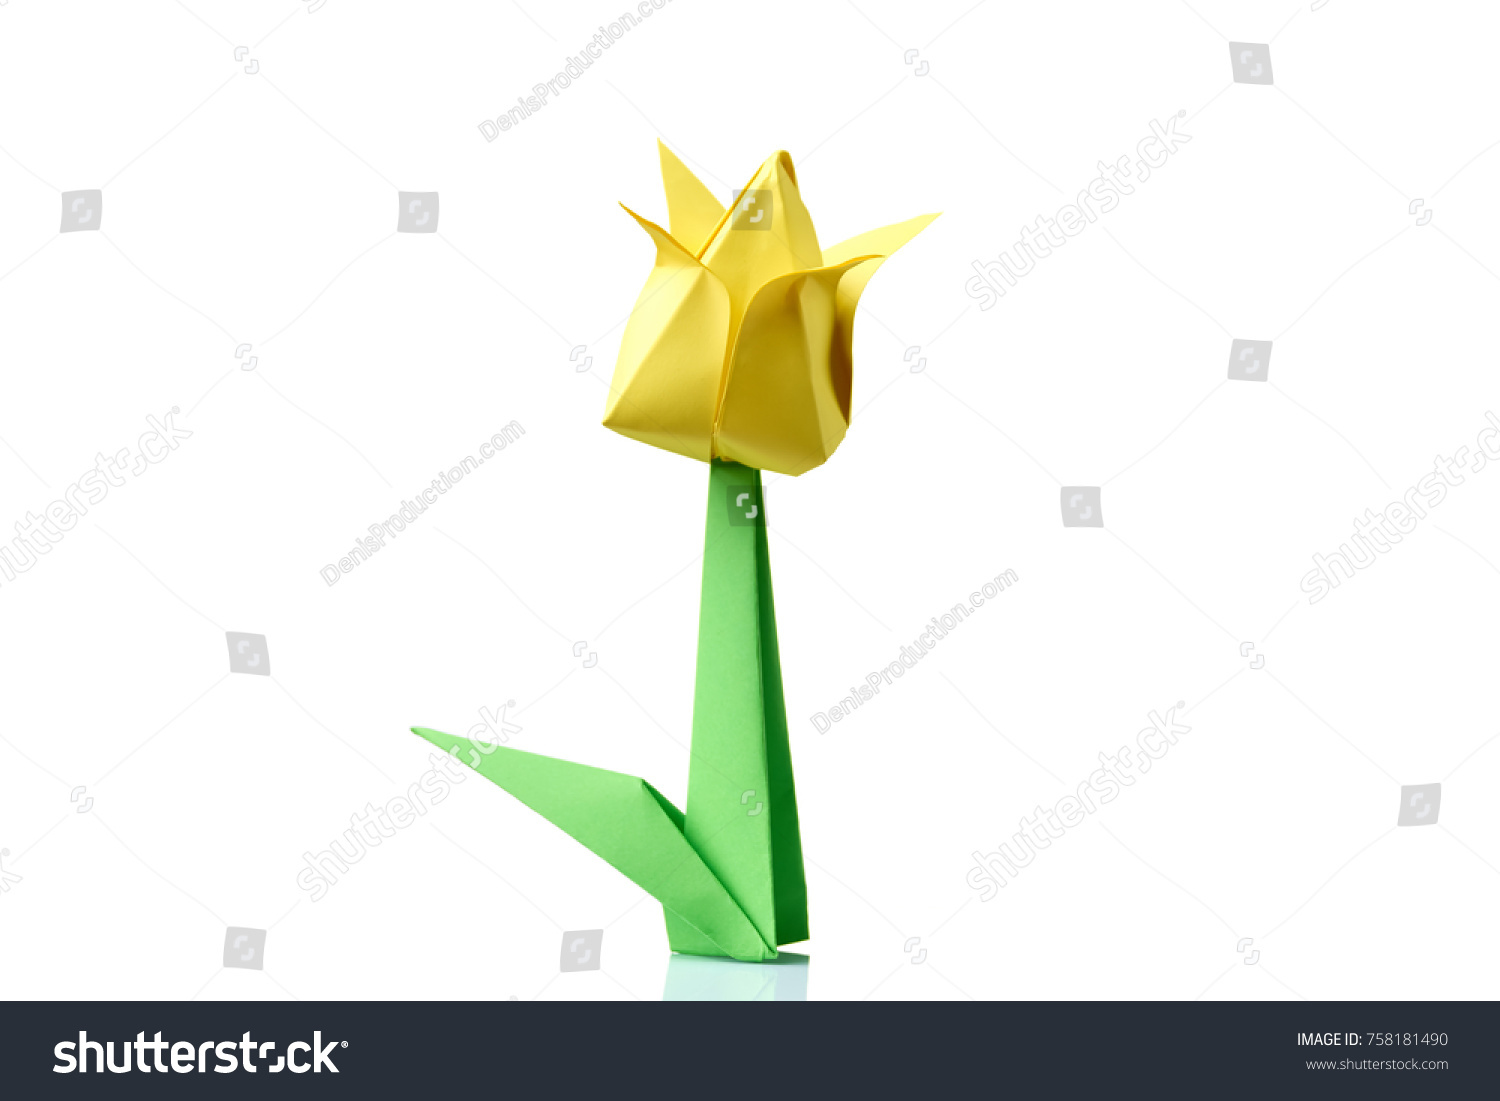 Yellow tulip origami flower. Traditional model of bulb and leaf. Simple origami crafting for beginners. #758181490